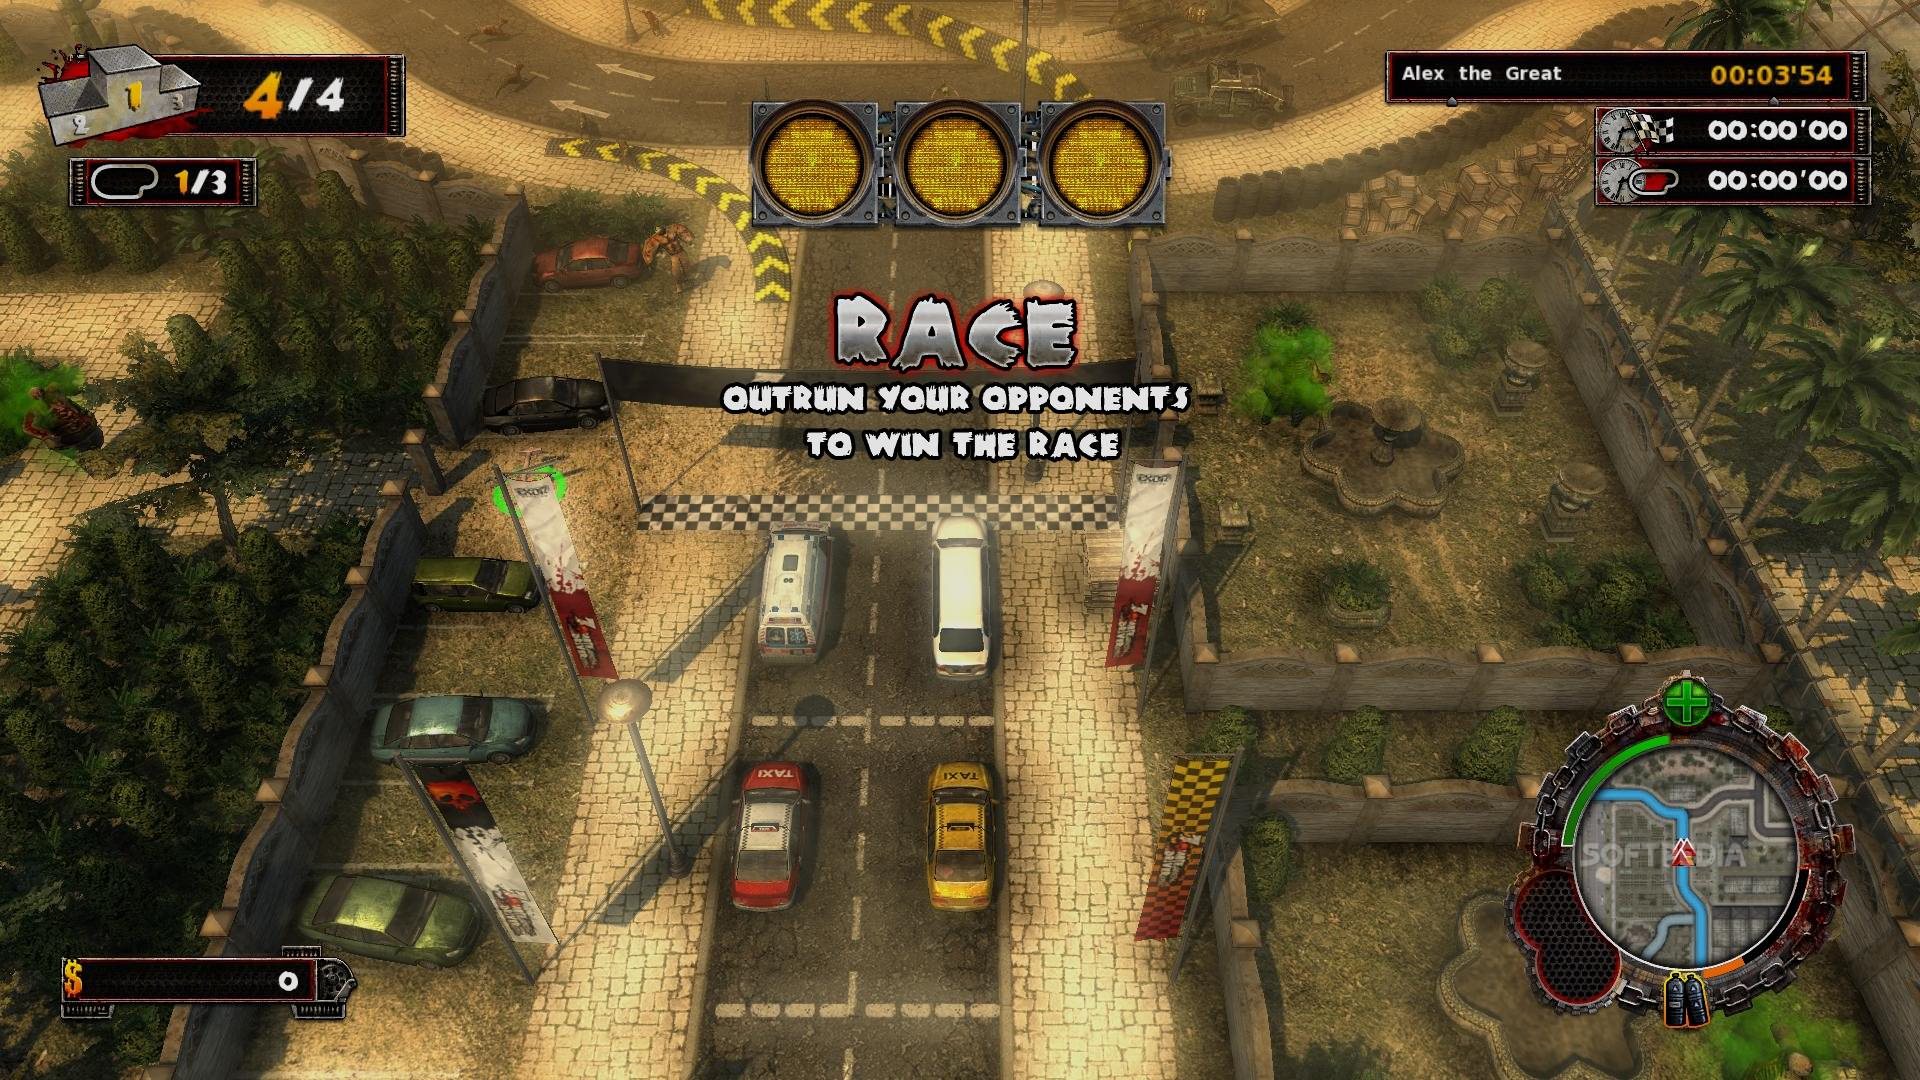 zombie driver free download